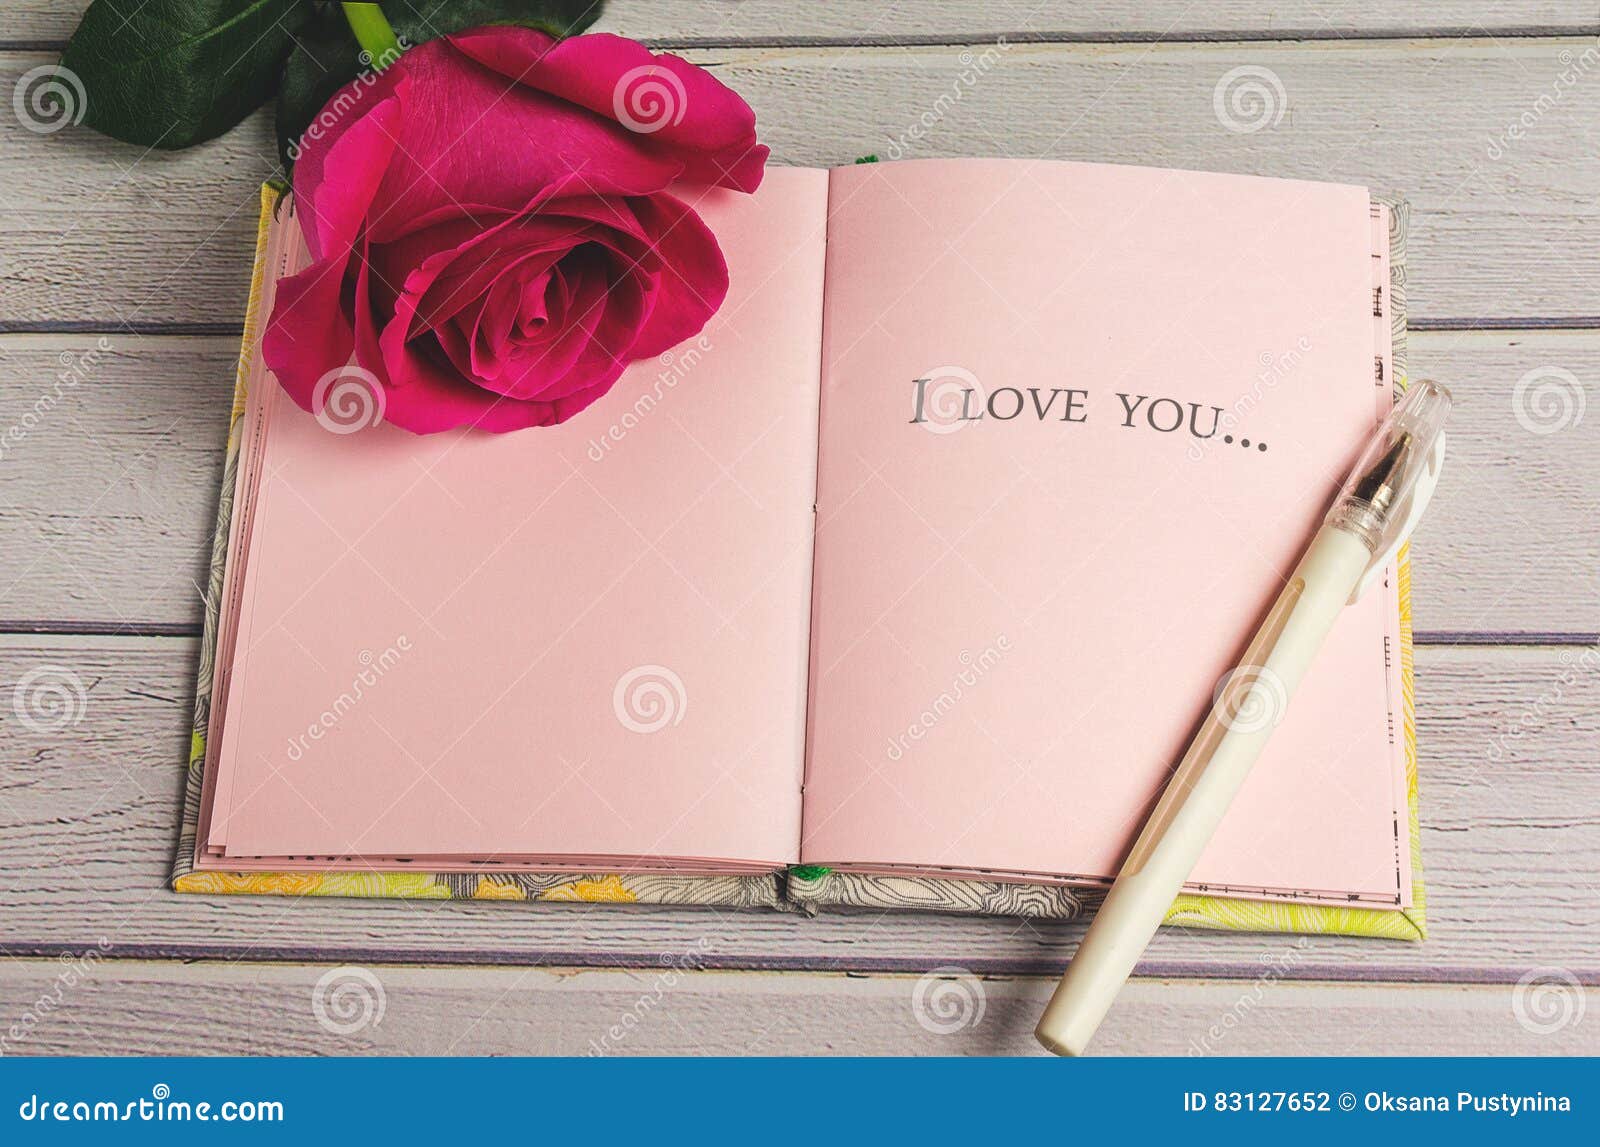 Romantic Composition with Rose Flowers and Text I Love You St ...